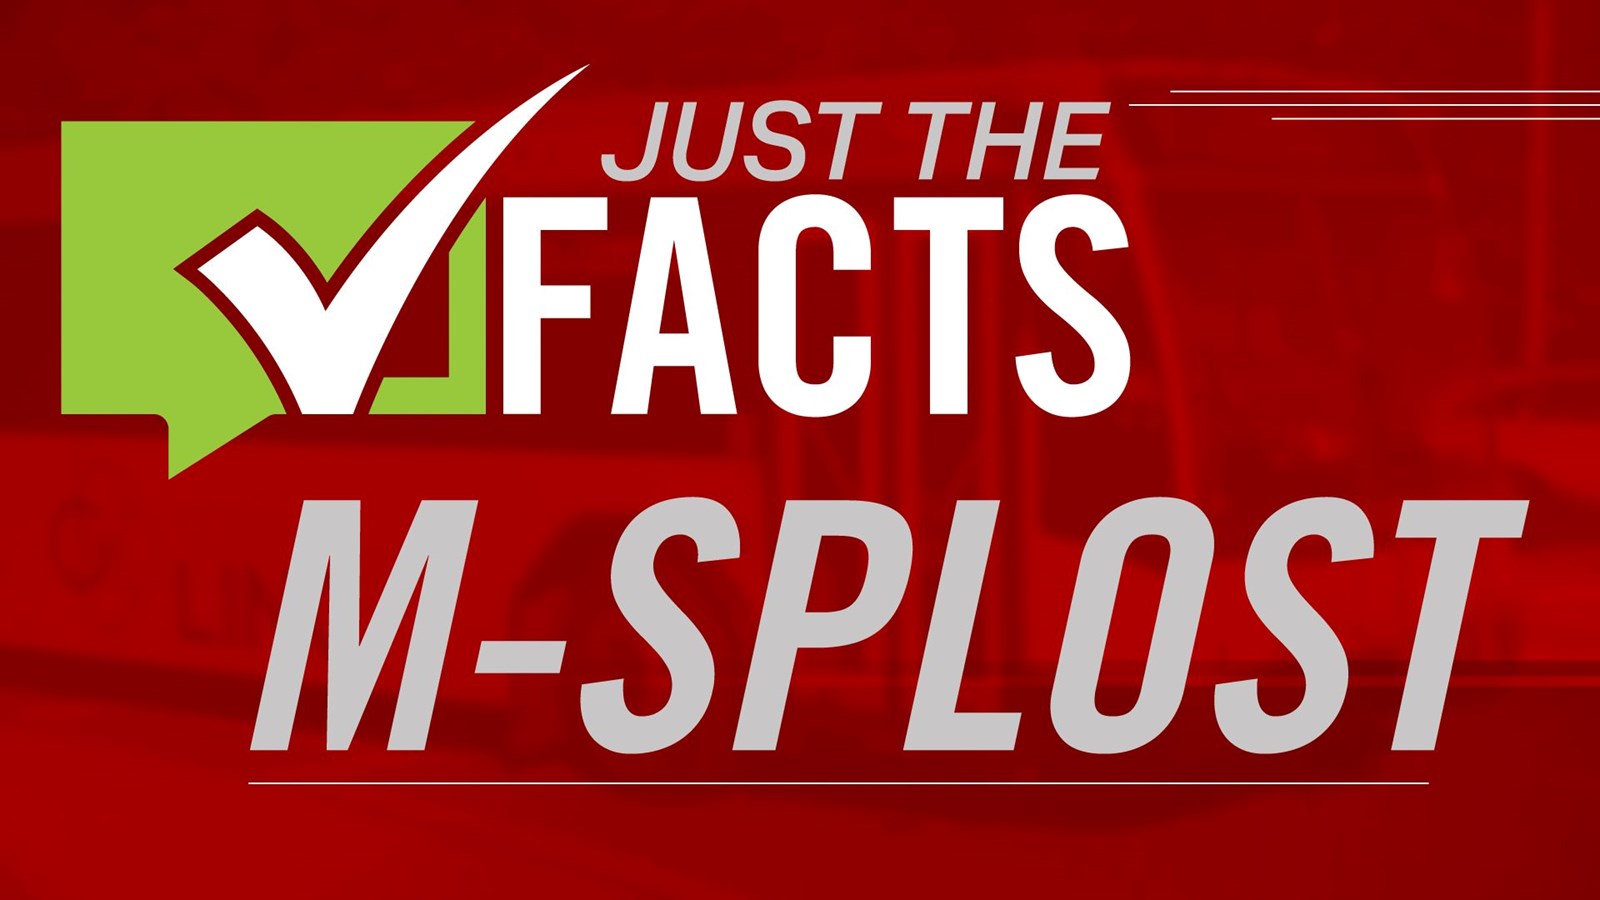 Just the Facts M-SPLOST